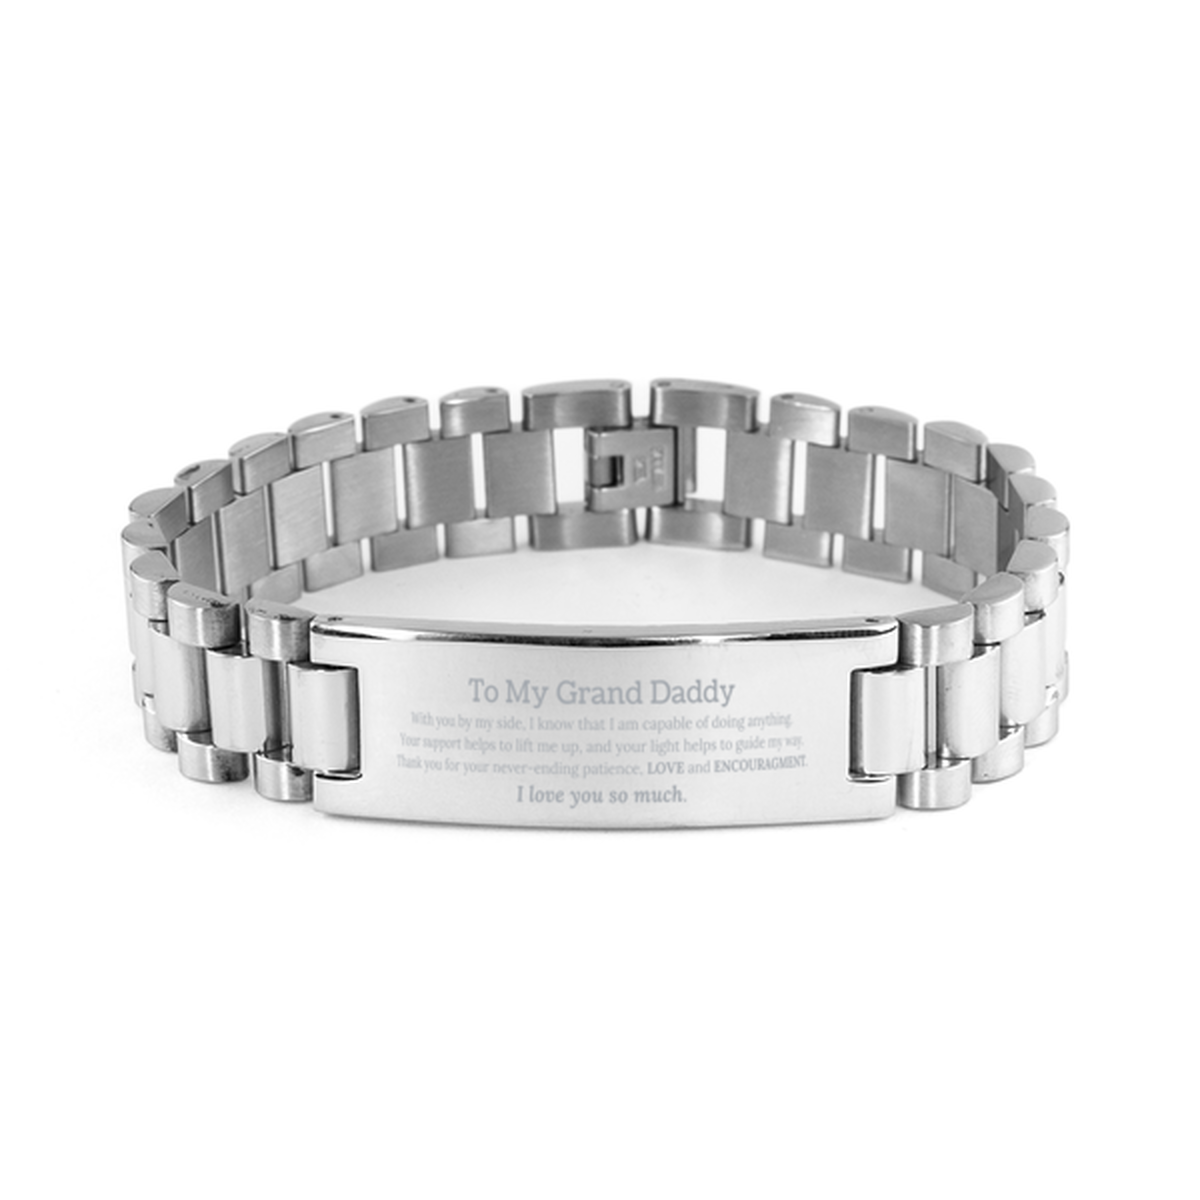 Appreciation Grand Daddy Ladder Stainless Steel Bracelet Gifts, To My Grand Daddy Birthday Christmas Wedding Keepsake Gifts for Grand Daddy With you by my side, I know that I am capable of doing anything. I love you so much